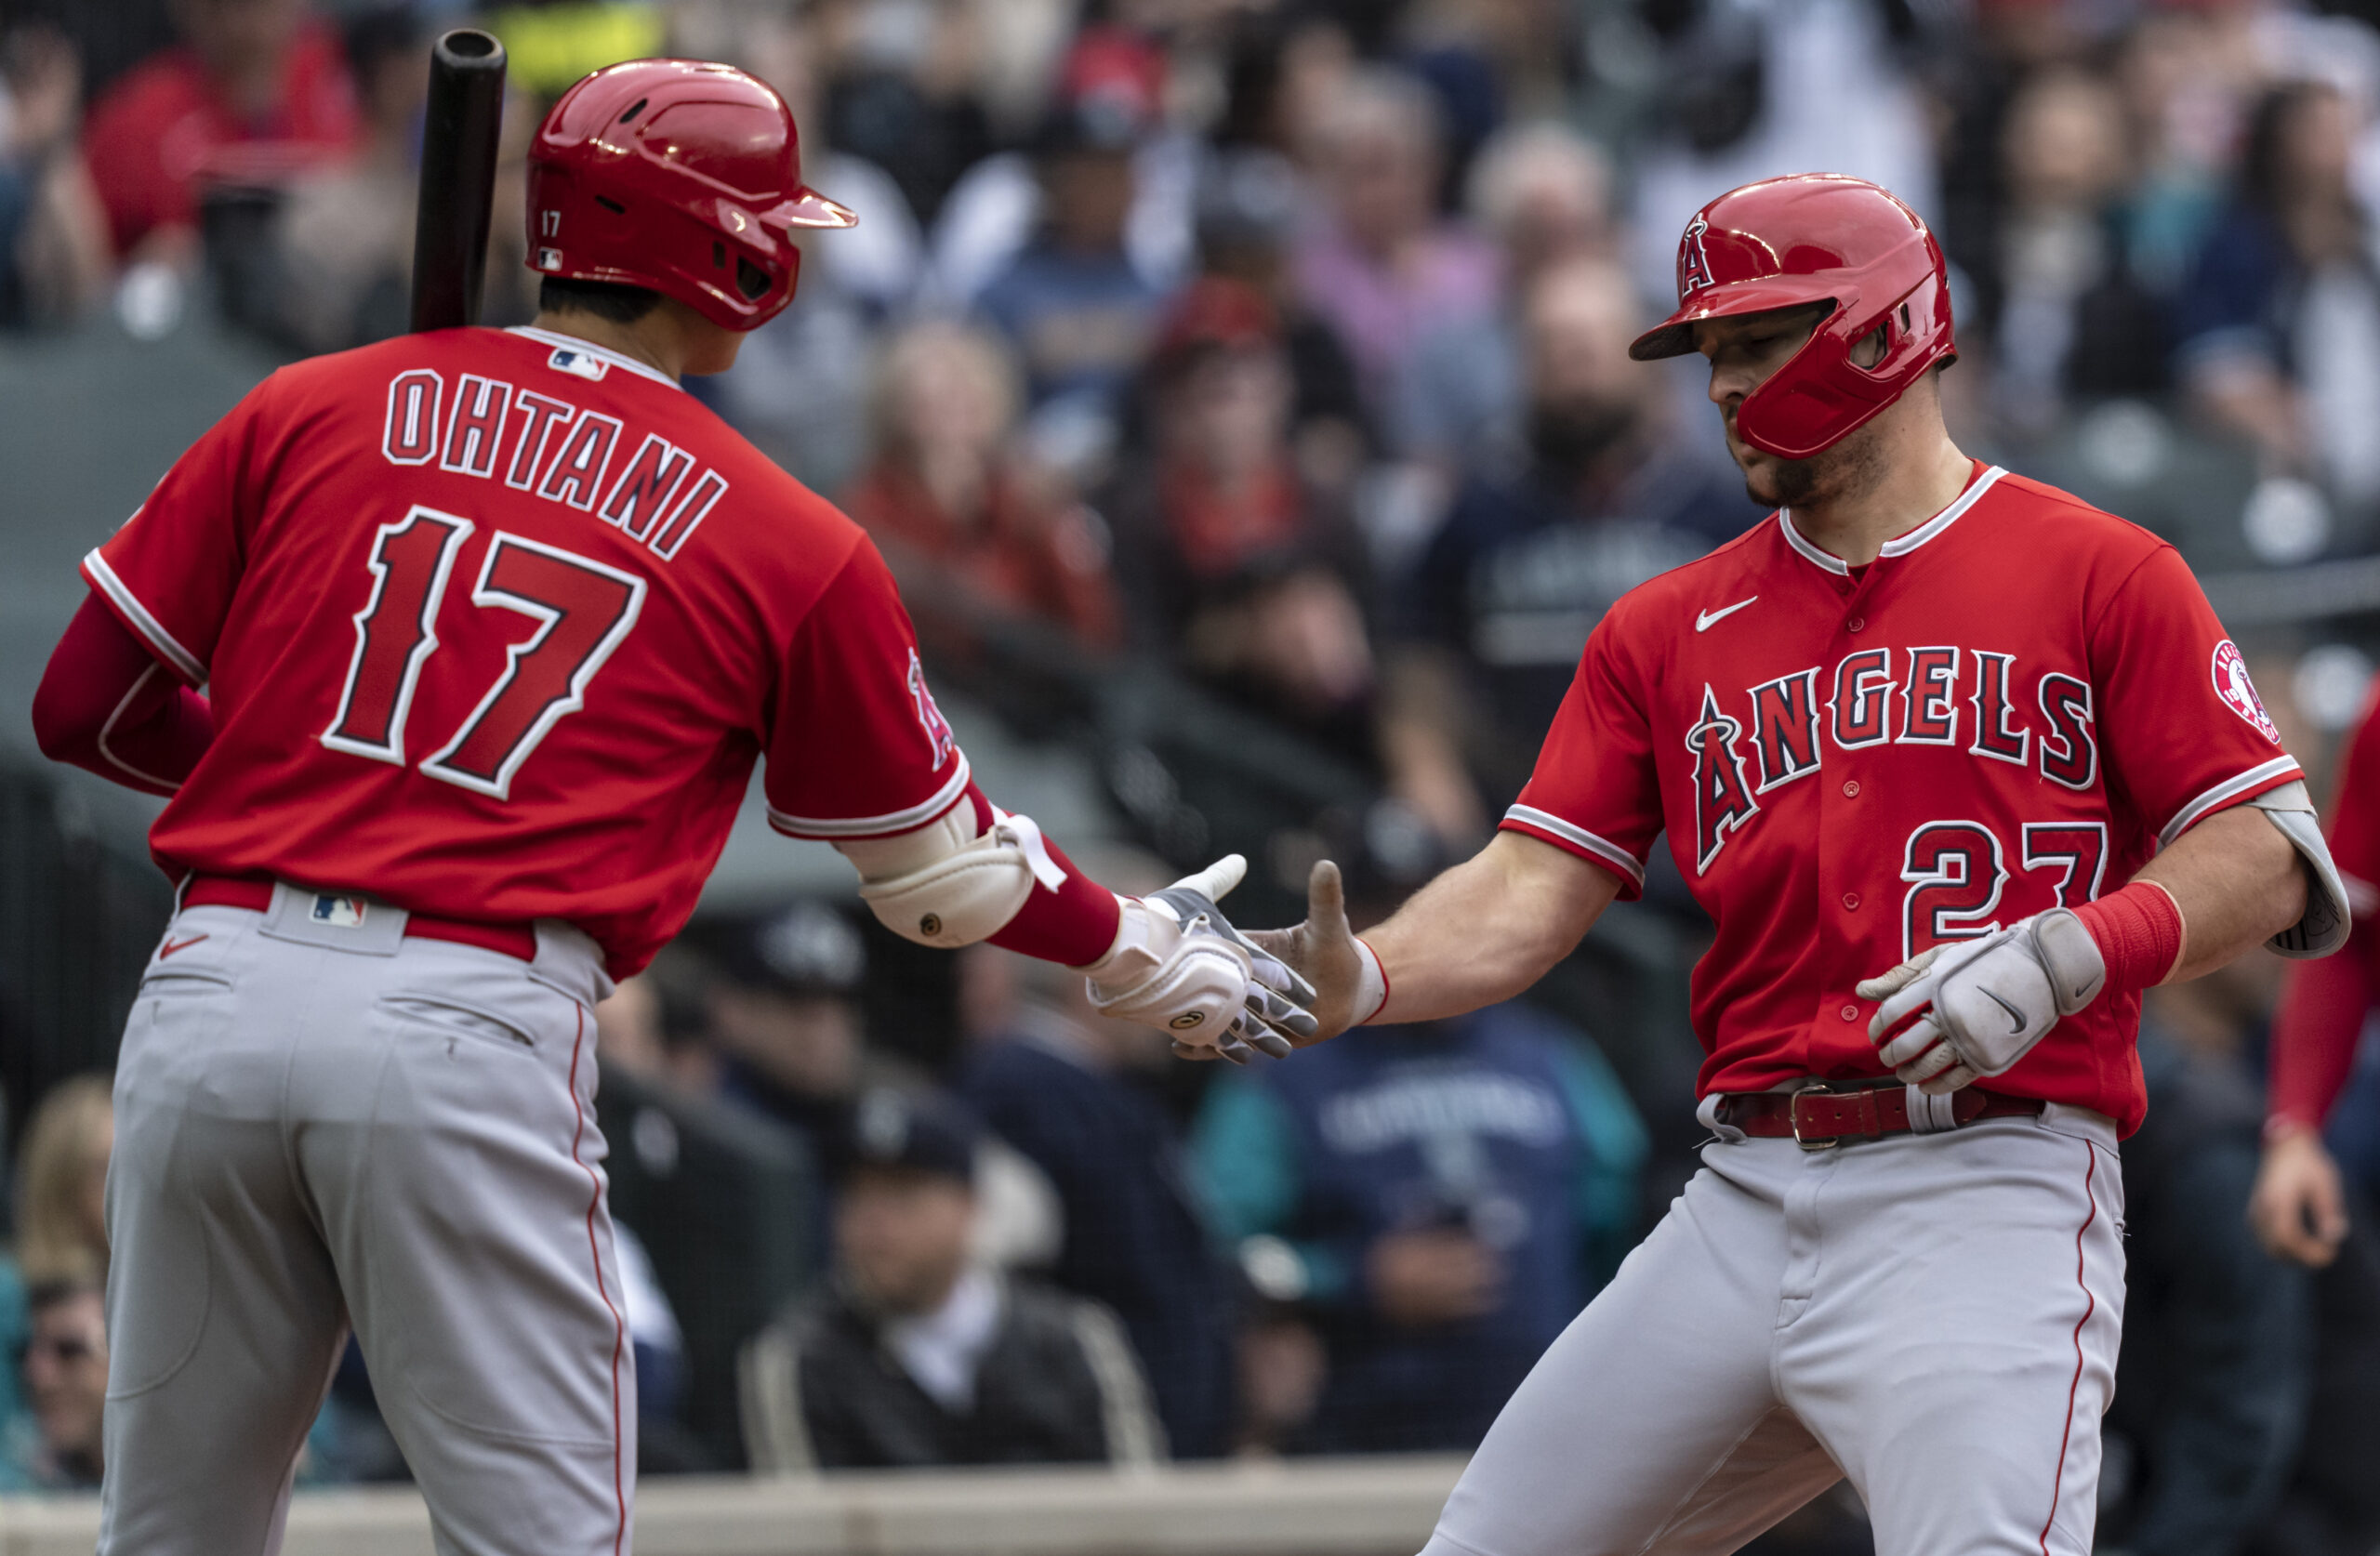 Strong Red Sox pitching keeps Mike Trout, Shohei Ohtani quiet in 5